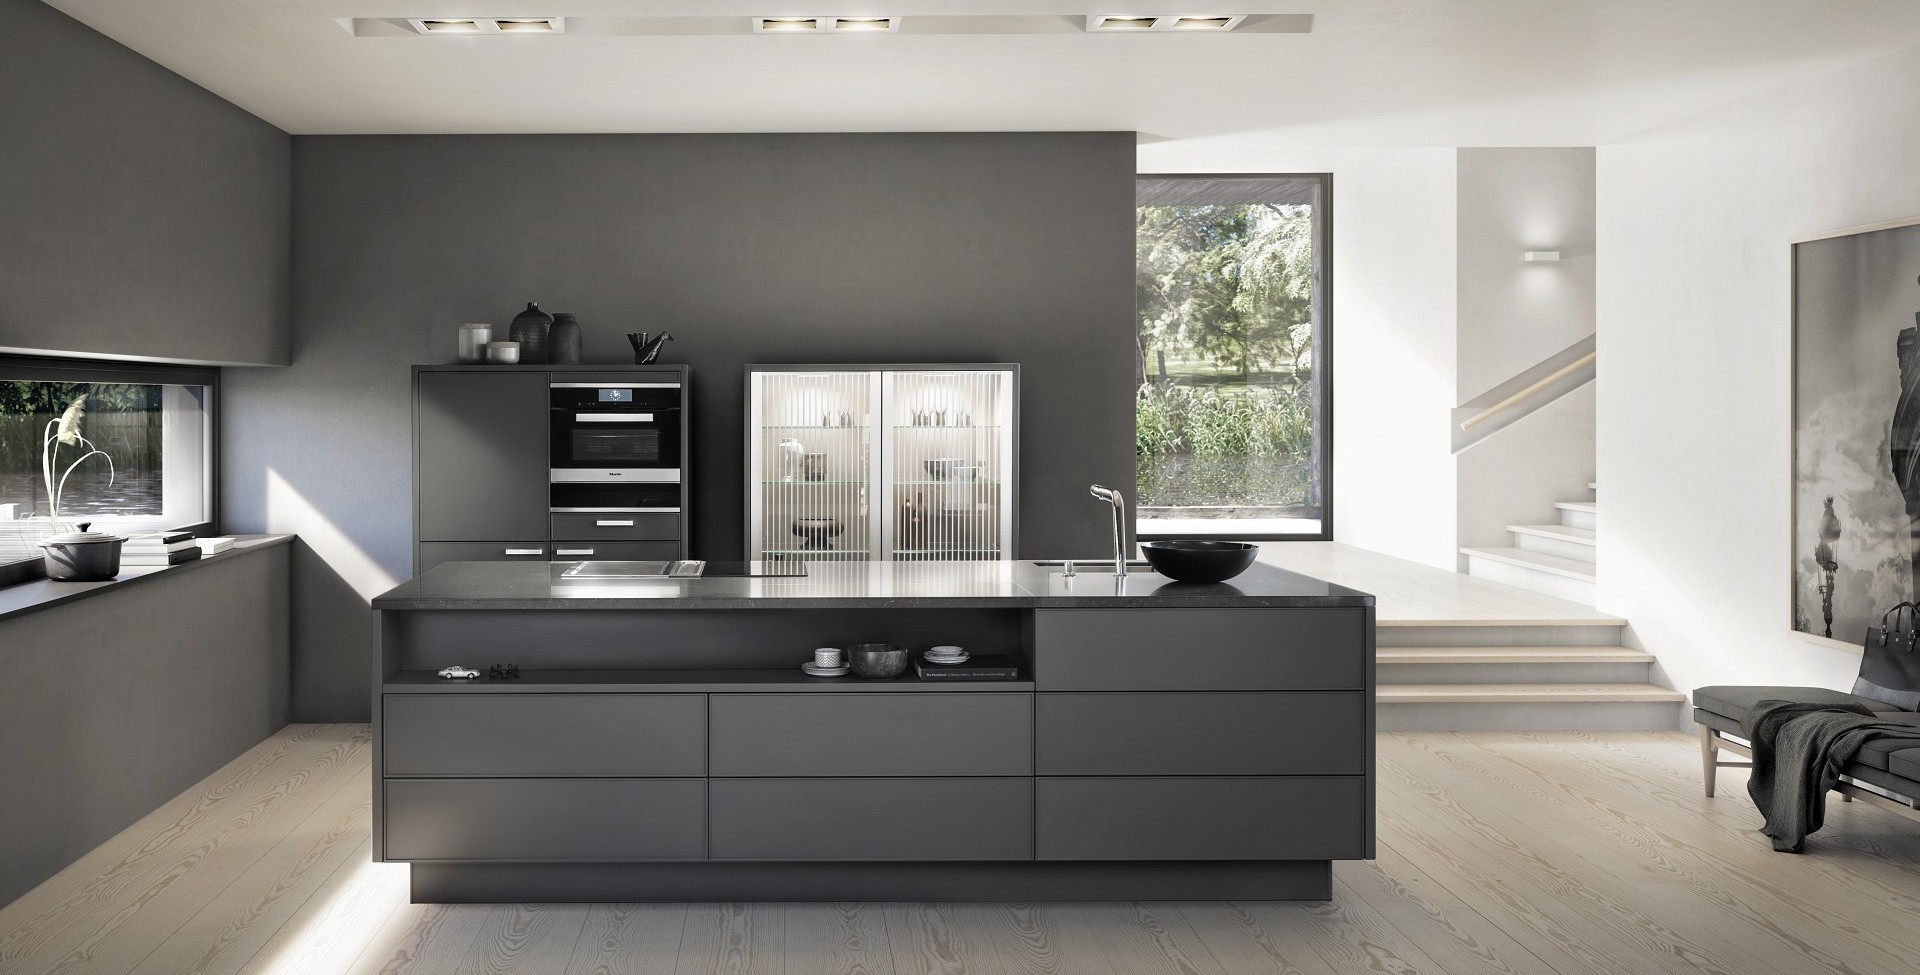 Siematic Cabinets Parts | Cabinets Matttroy